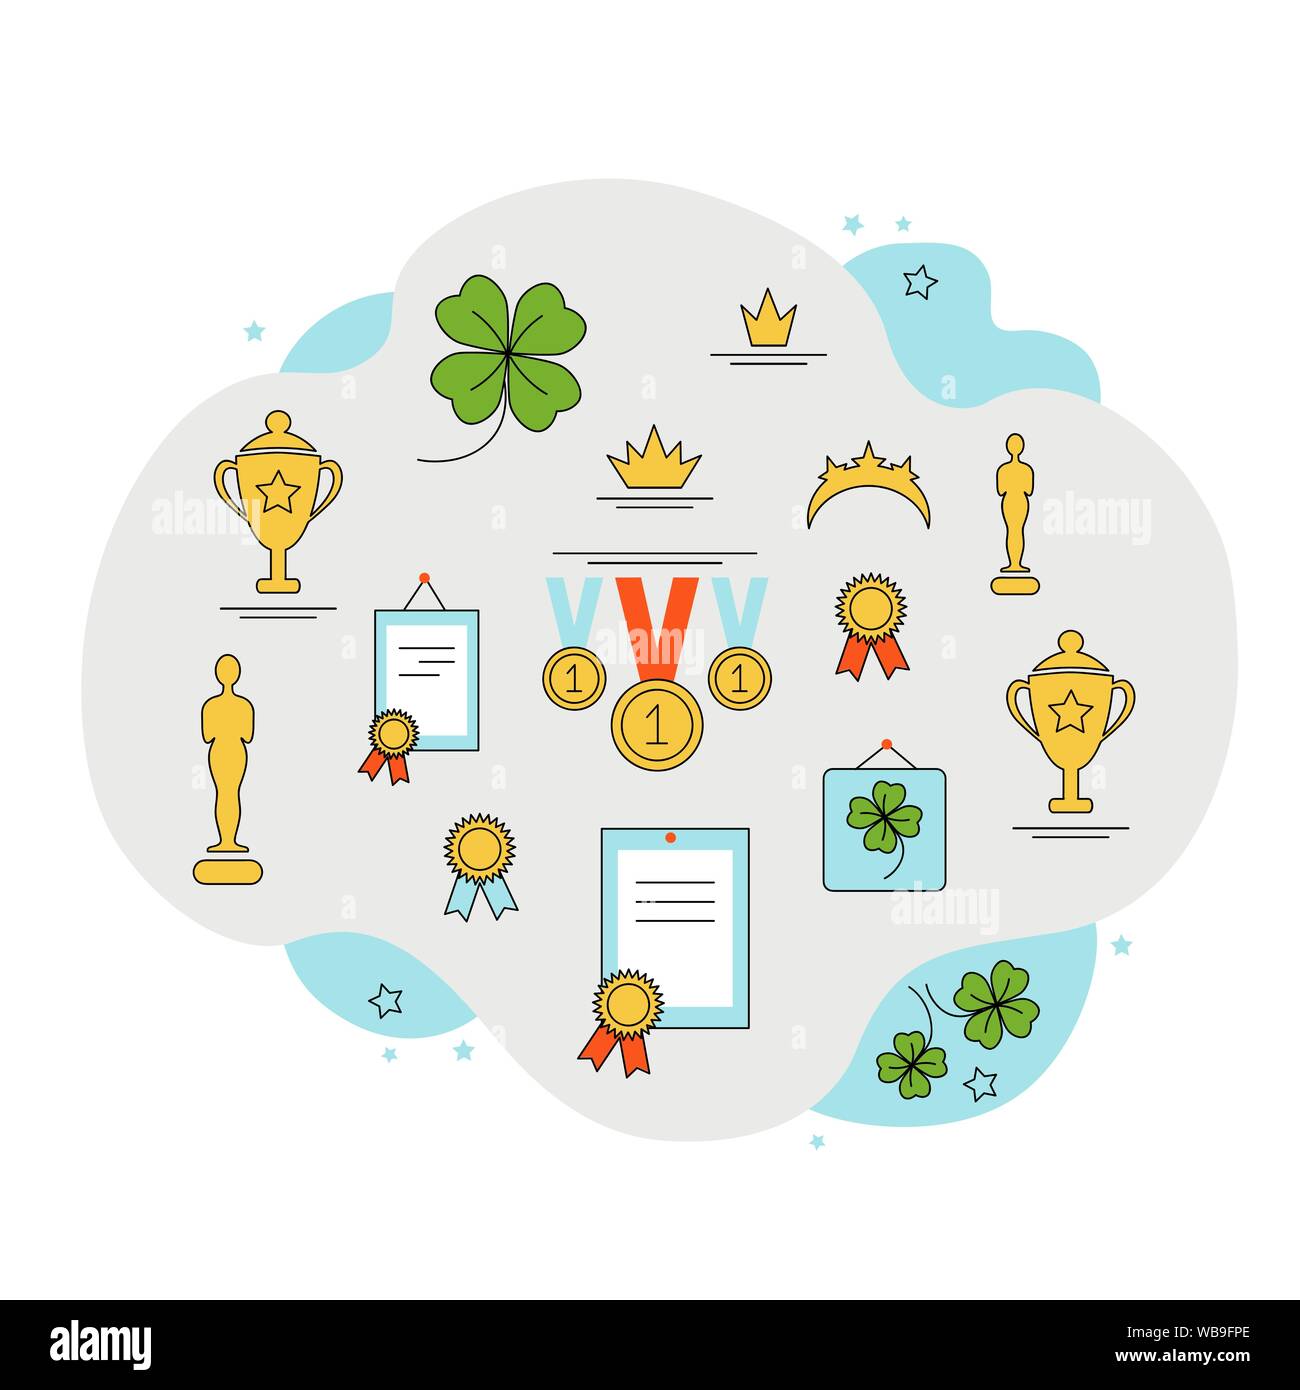 Vector illustration, luck symbol clover, sports awards, cup, medal, diploma, badge, diploma, crown, oscar on the shelves. The concept of competition, Stock Vector